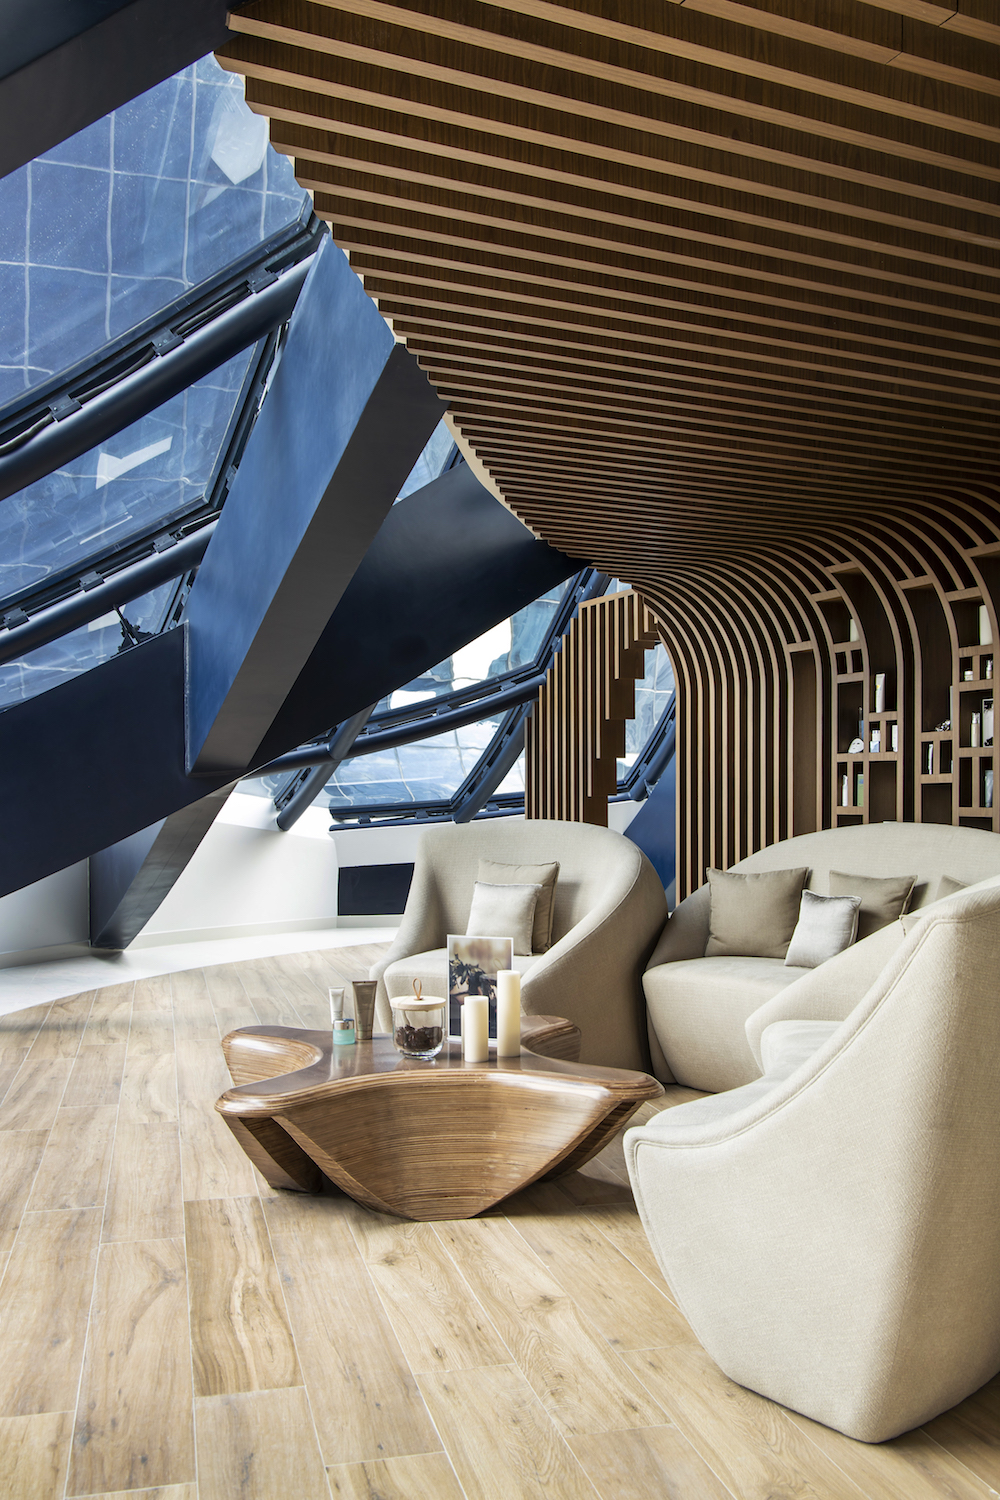 Viewing area with sofa in ME Dubai, designed by Zaha Hadid